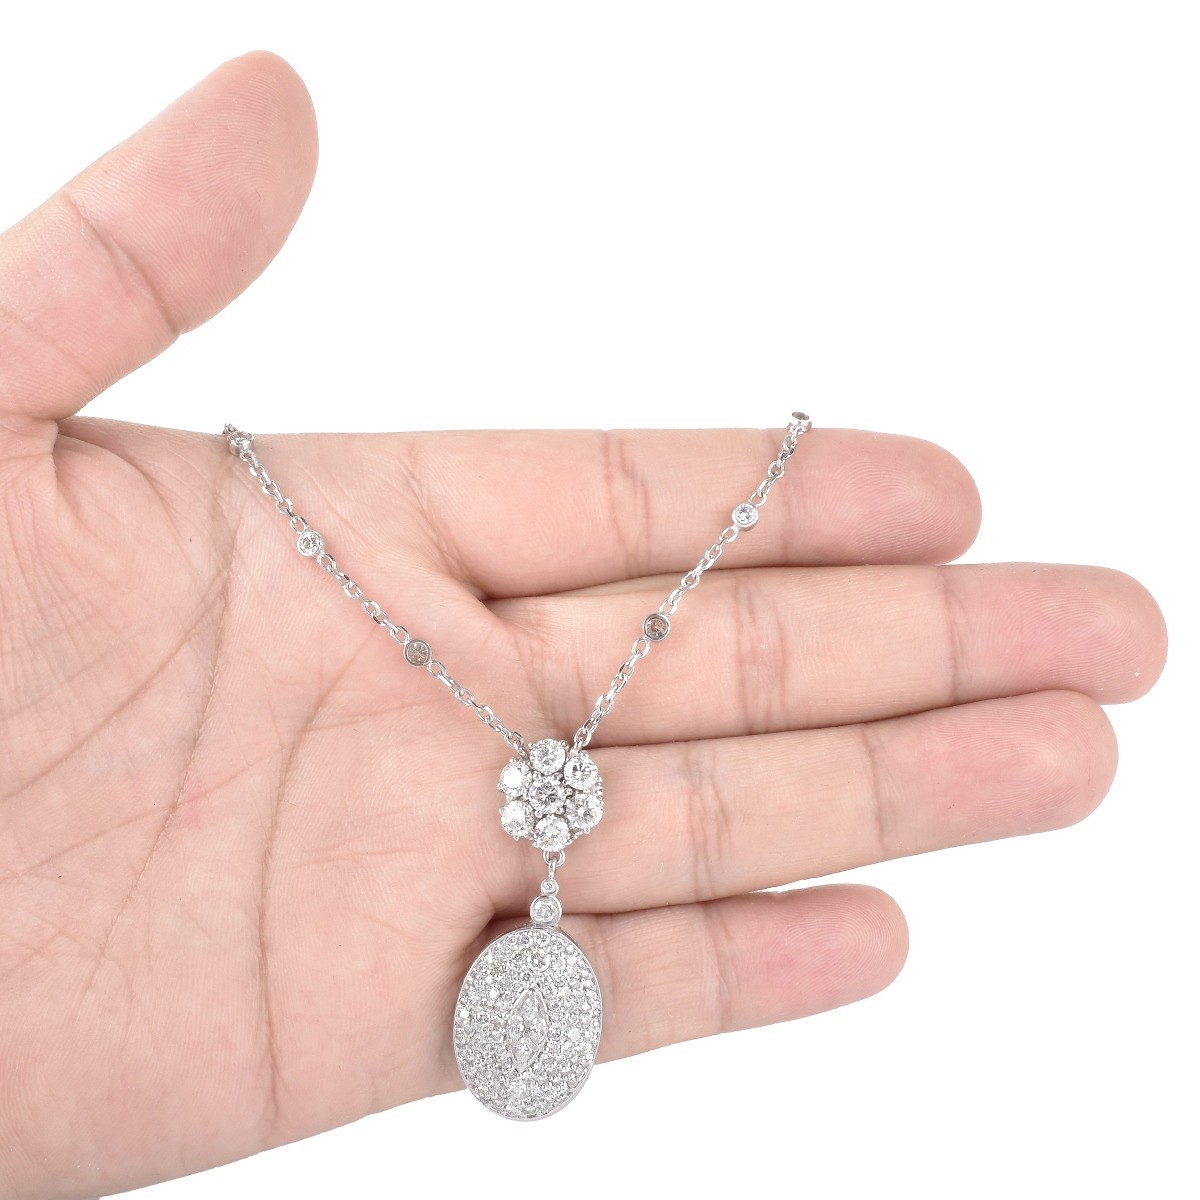 Diamond and 14K Gold Pendant Necklace